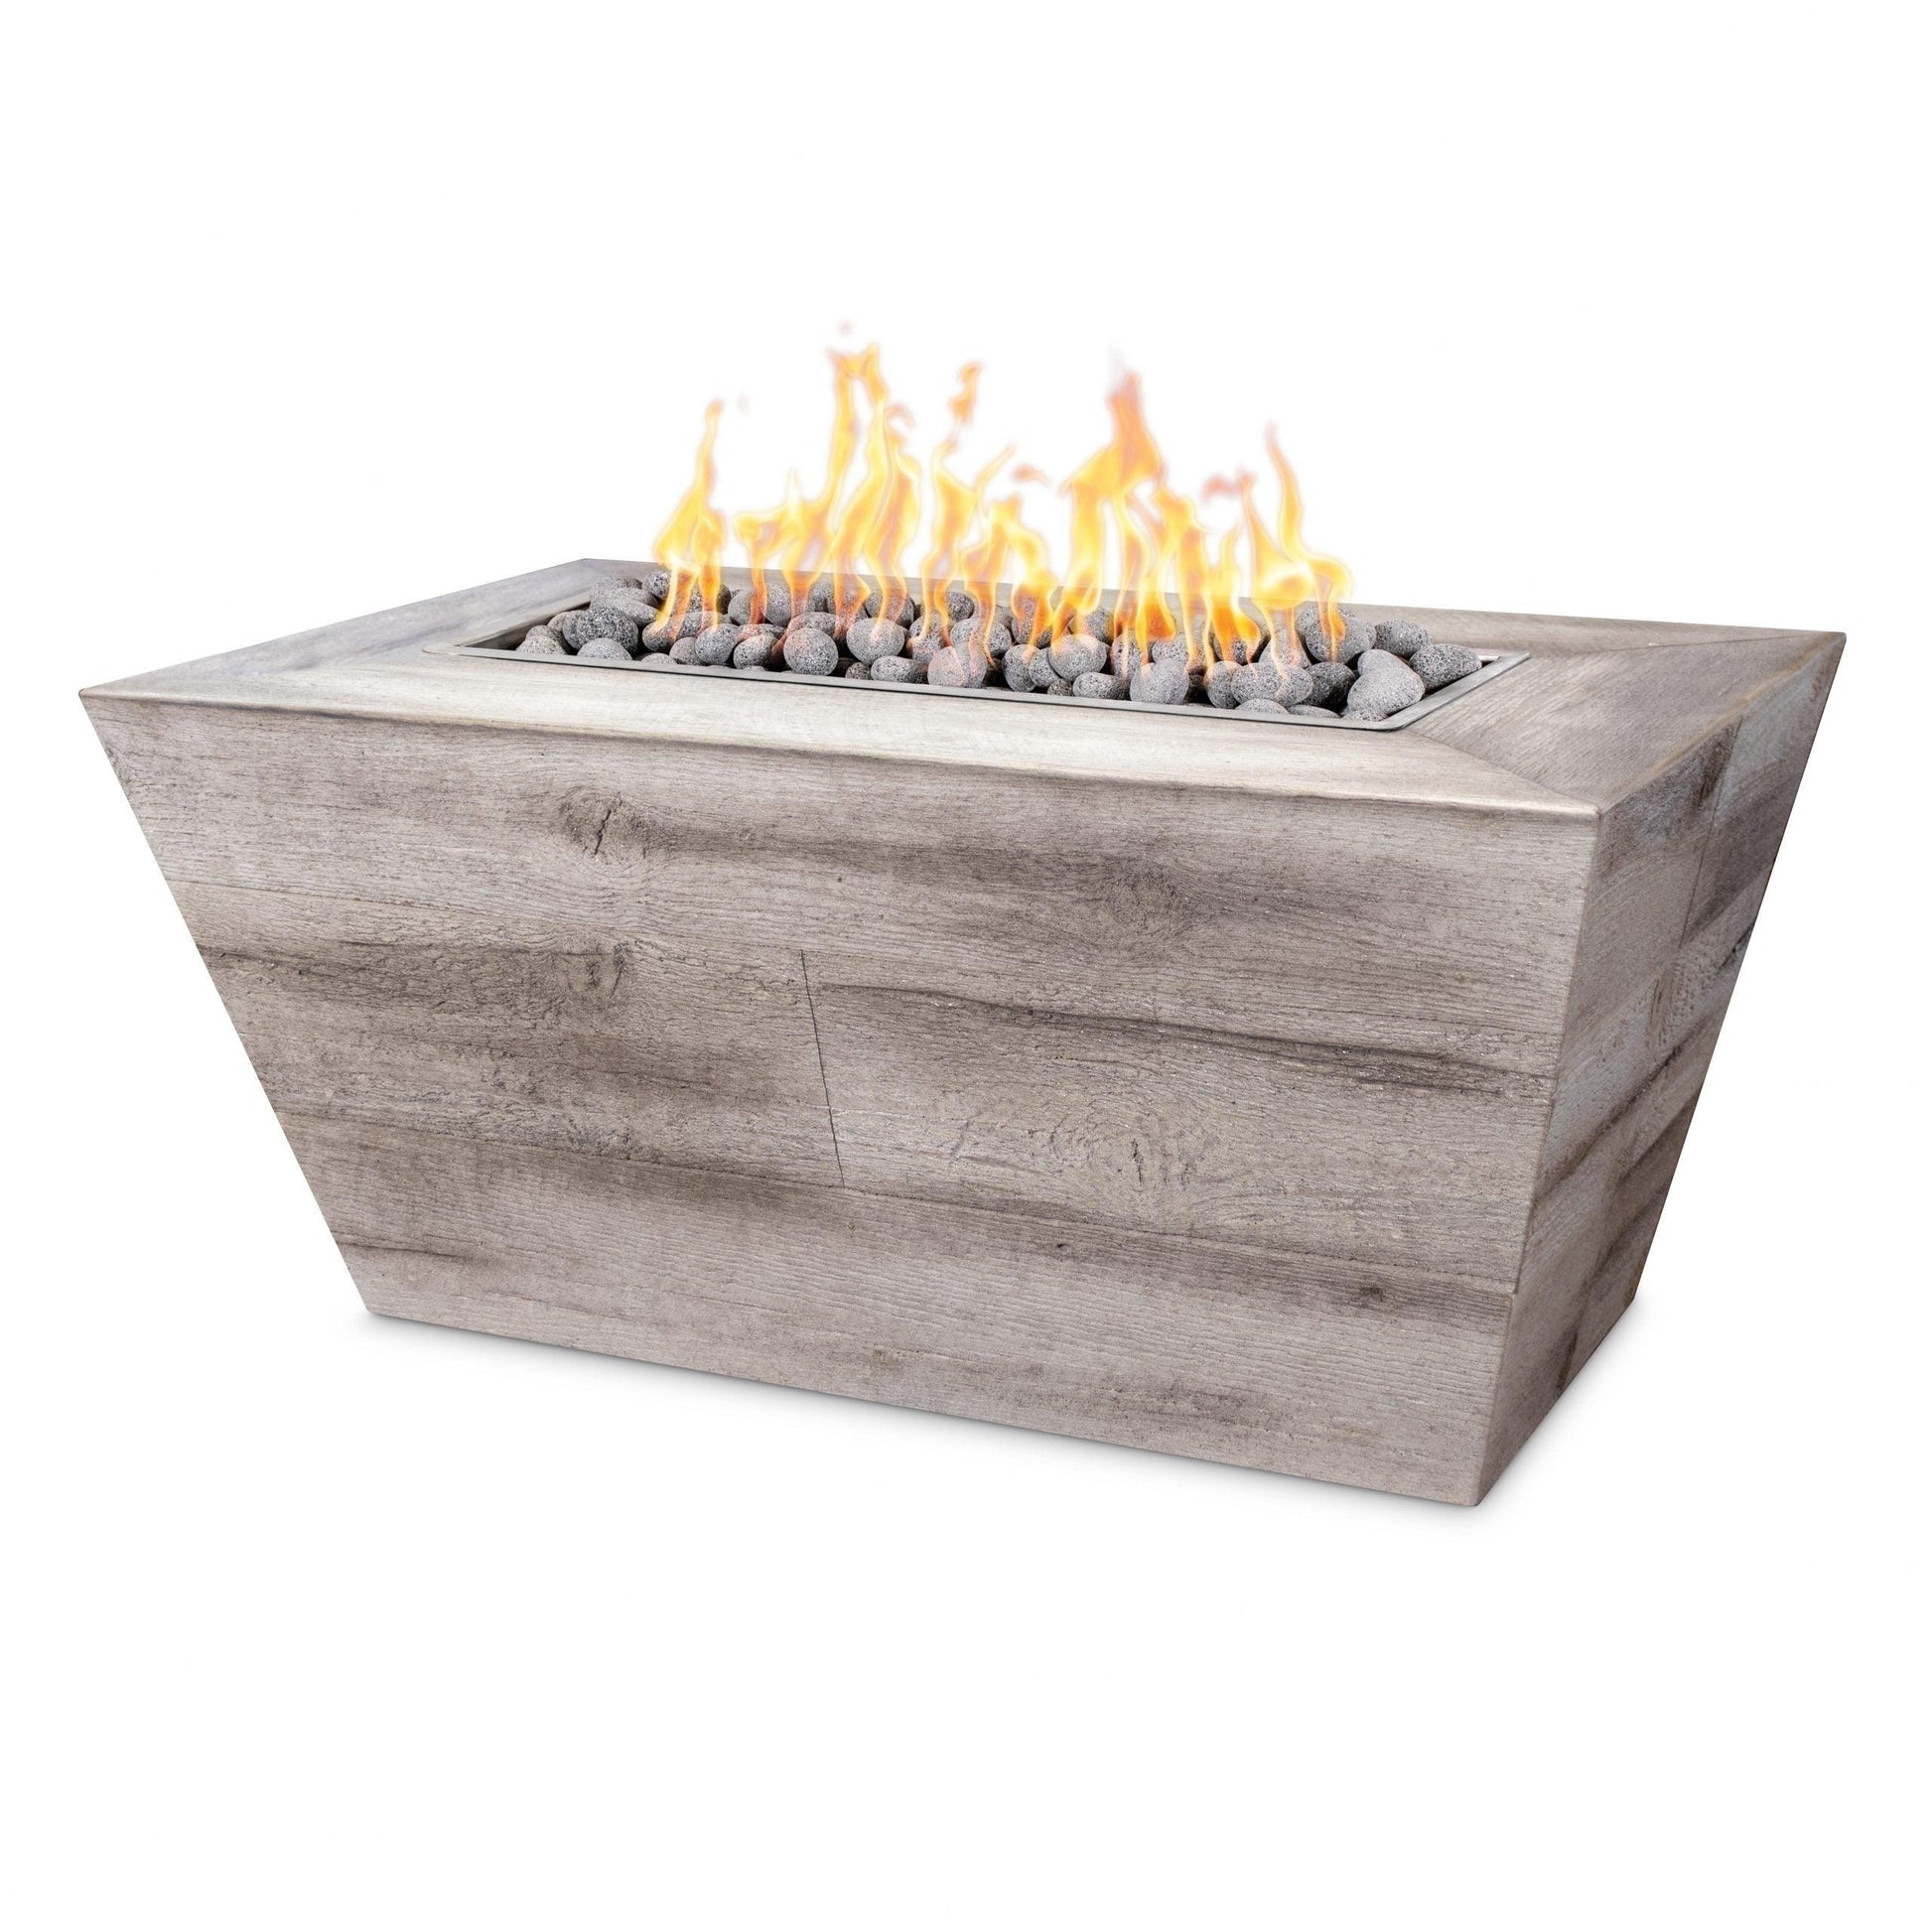 Plymouth Fire Pit Wood grain scaled